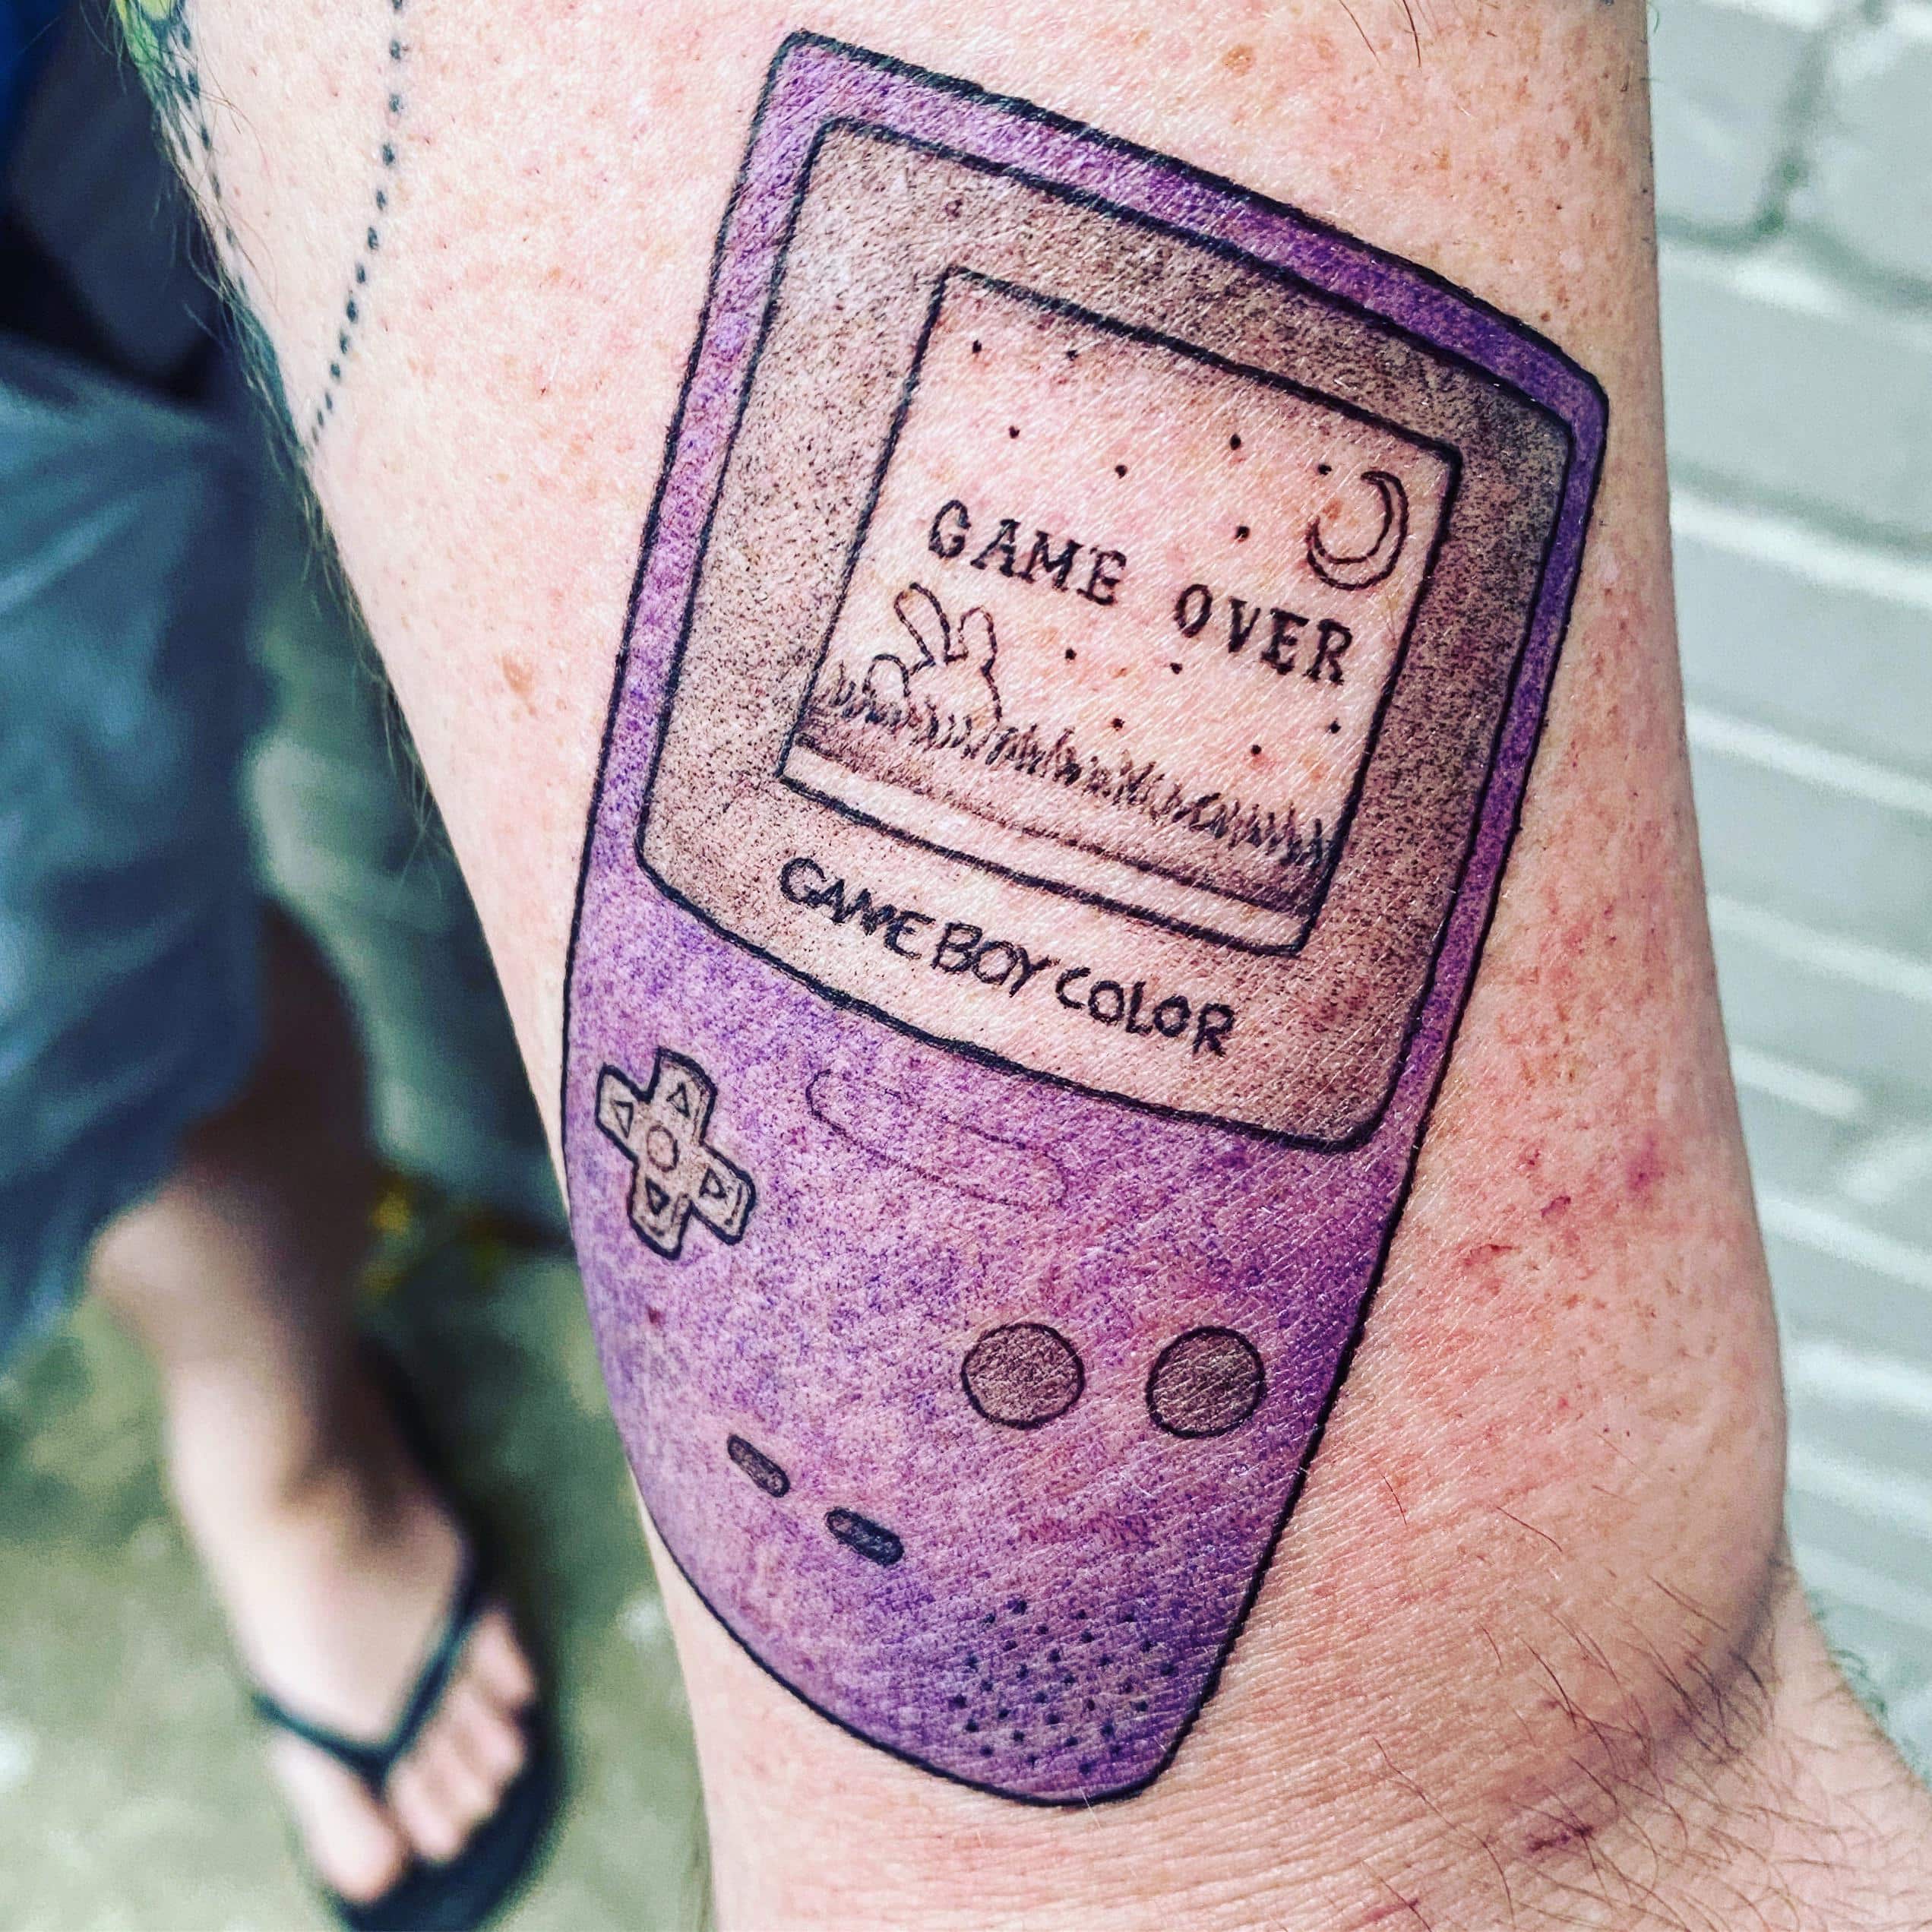 Gameboy Color done by Chelsea at Fade to Black in Ft Worth, TX : tattoos